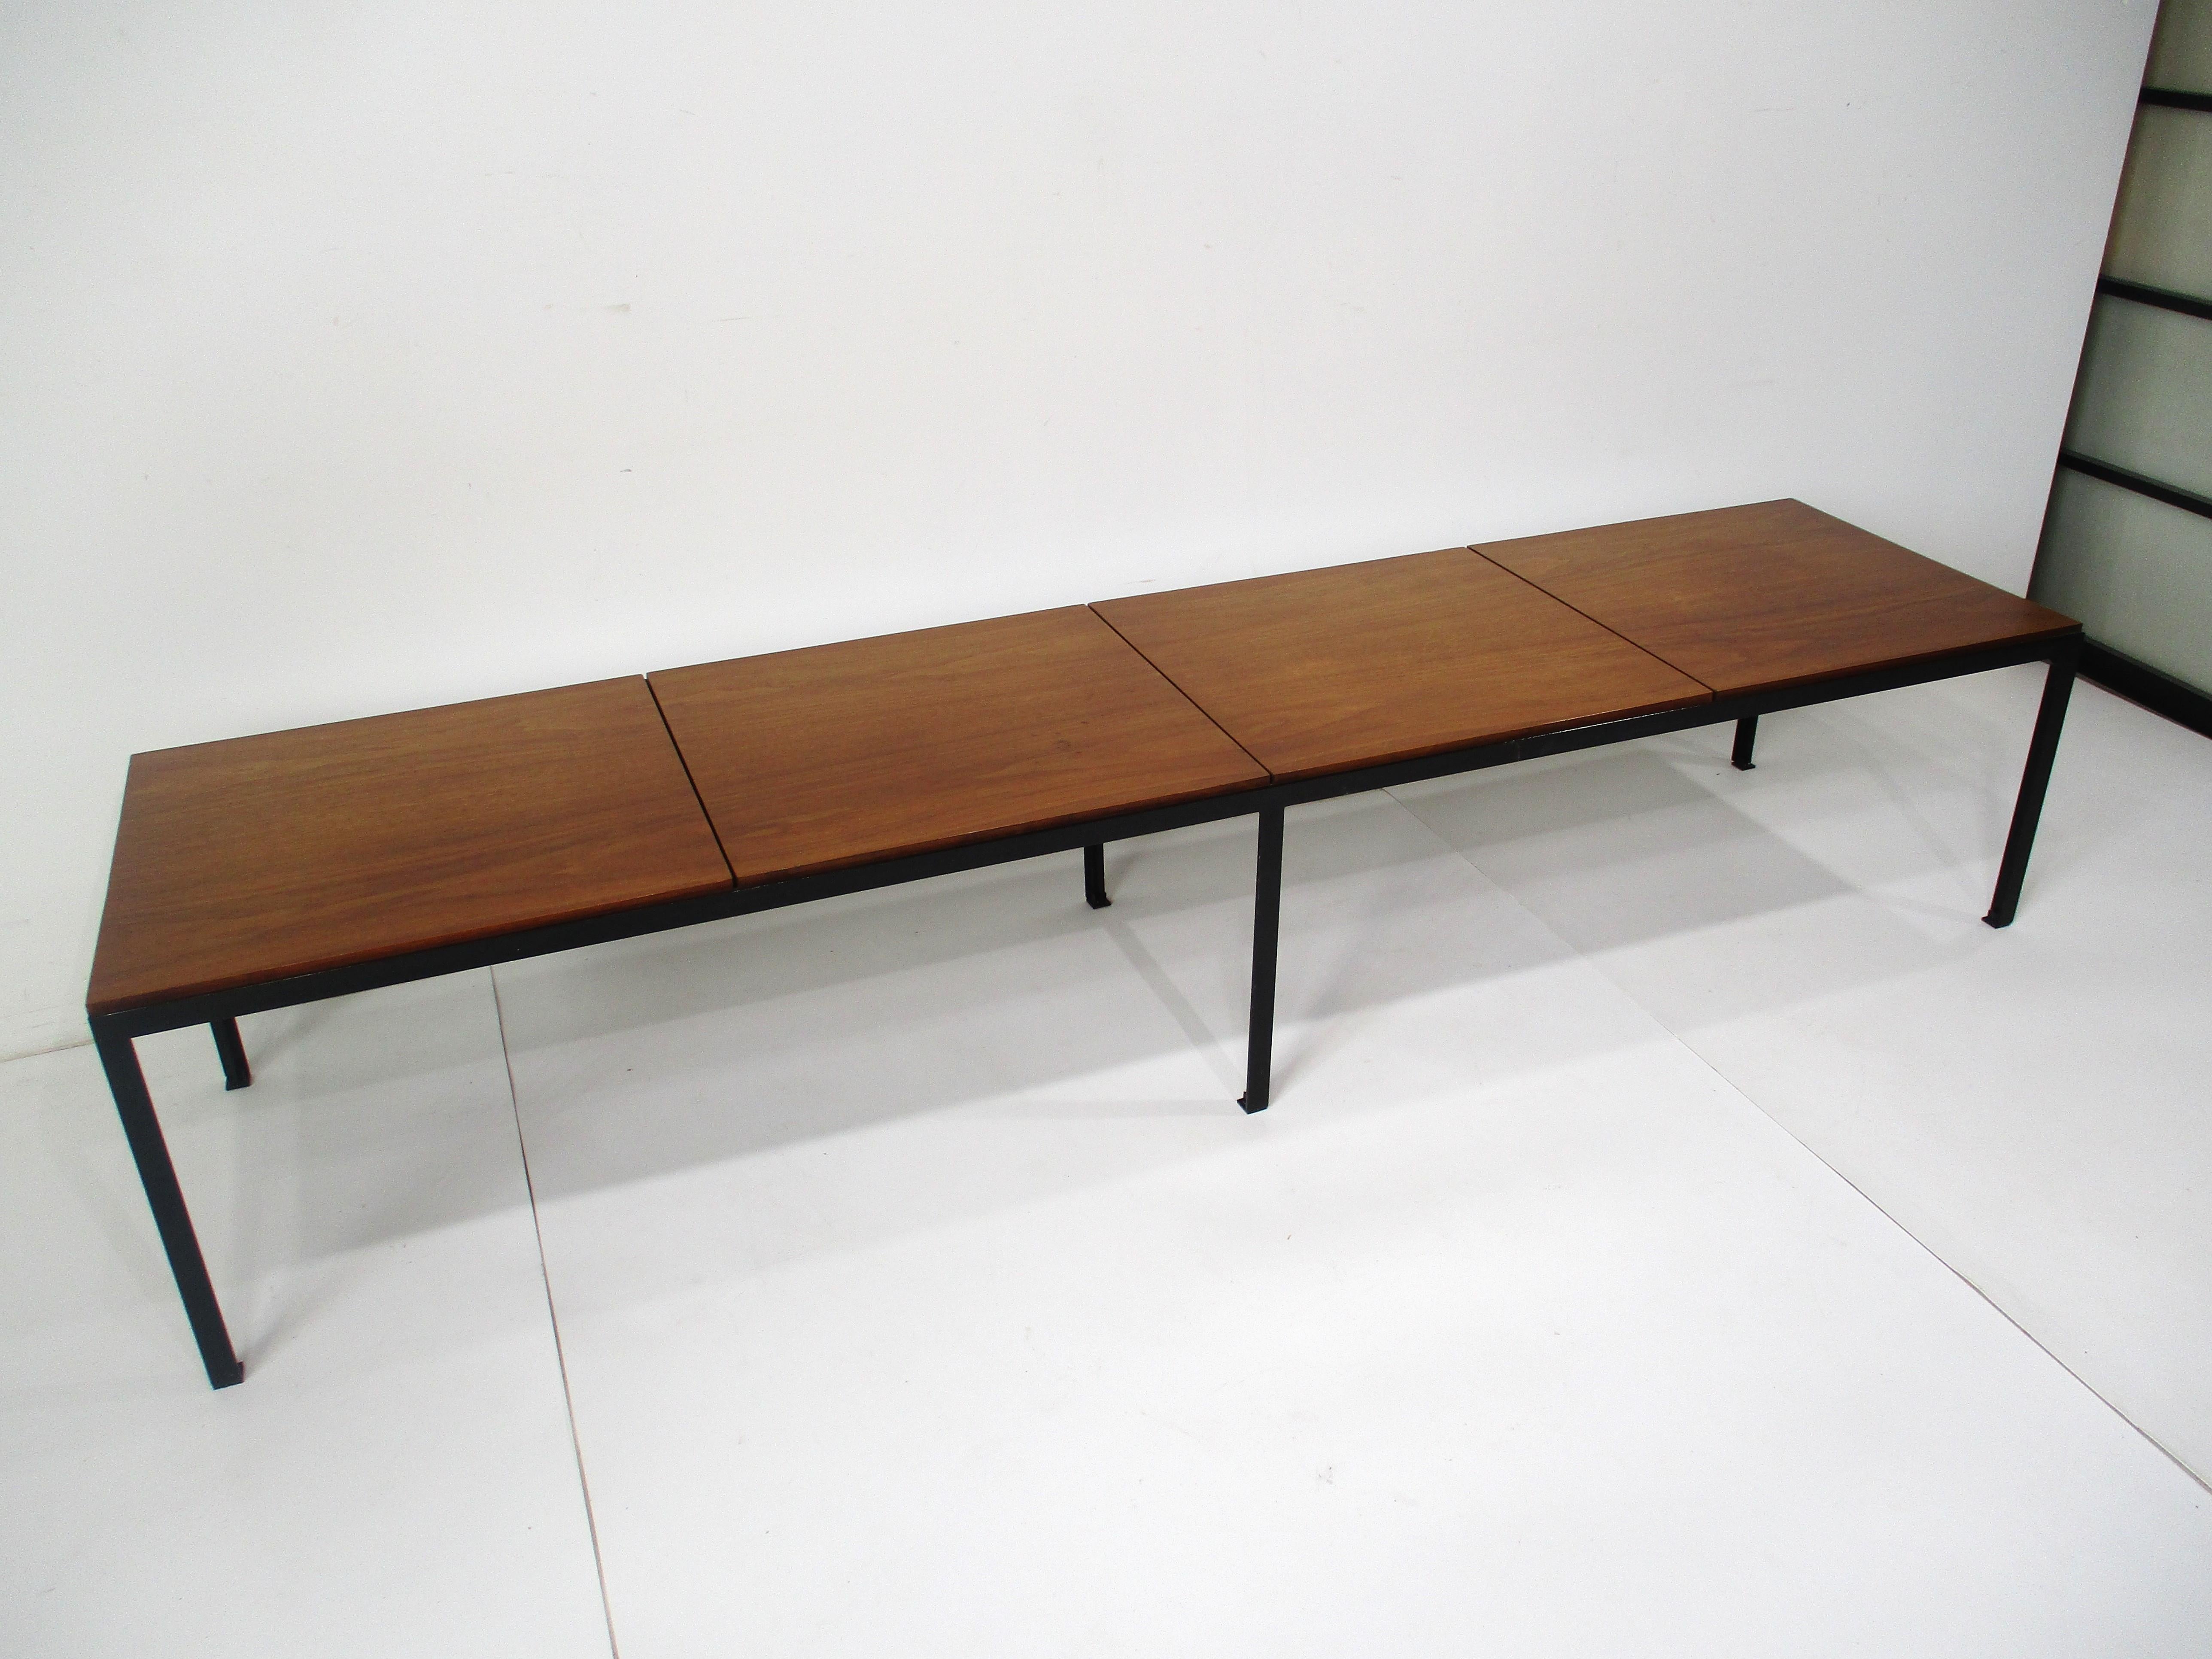 Early T Angle Walnut Coffee Table / Bench by Florence Knoll # 332 for Knoll (A)  For Sale 5